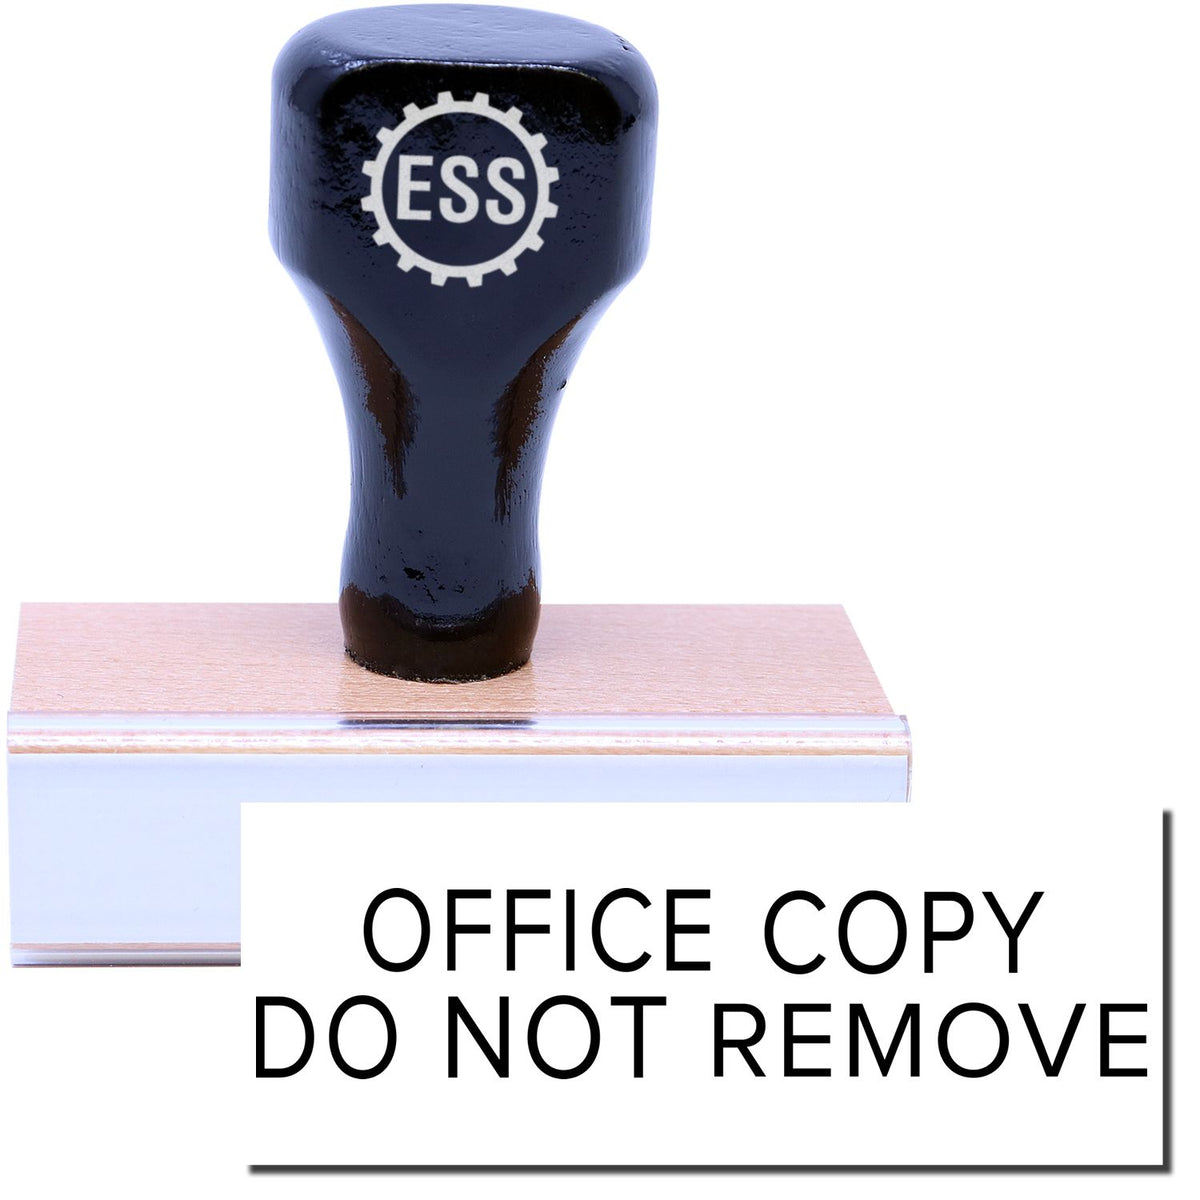 A stock office rubber stamp with a stamped image showing how the text &quot;OFFICE COPY DO NOT REMOVE&quot; in a narrow font is displayed after stamping.